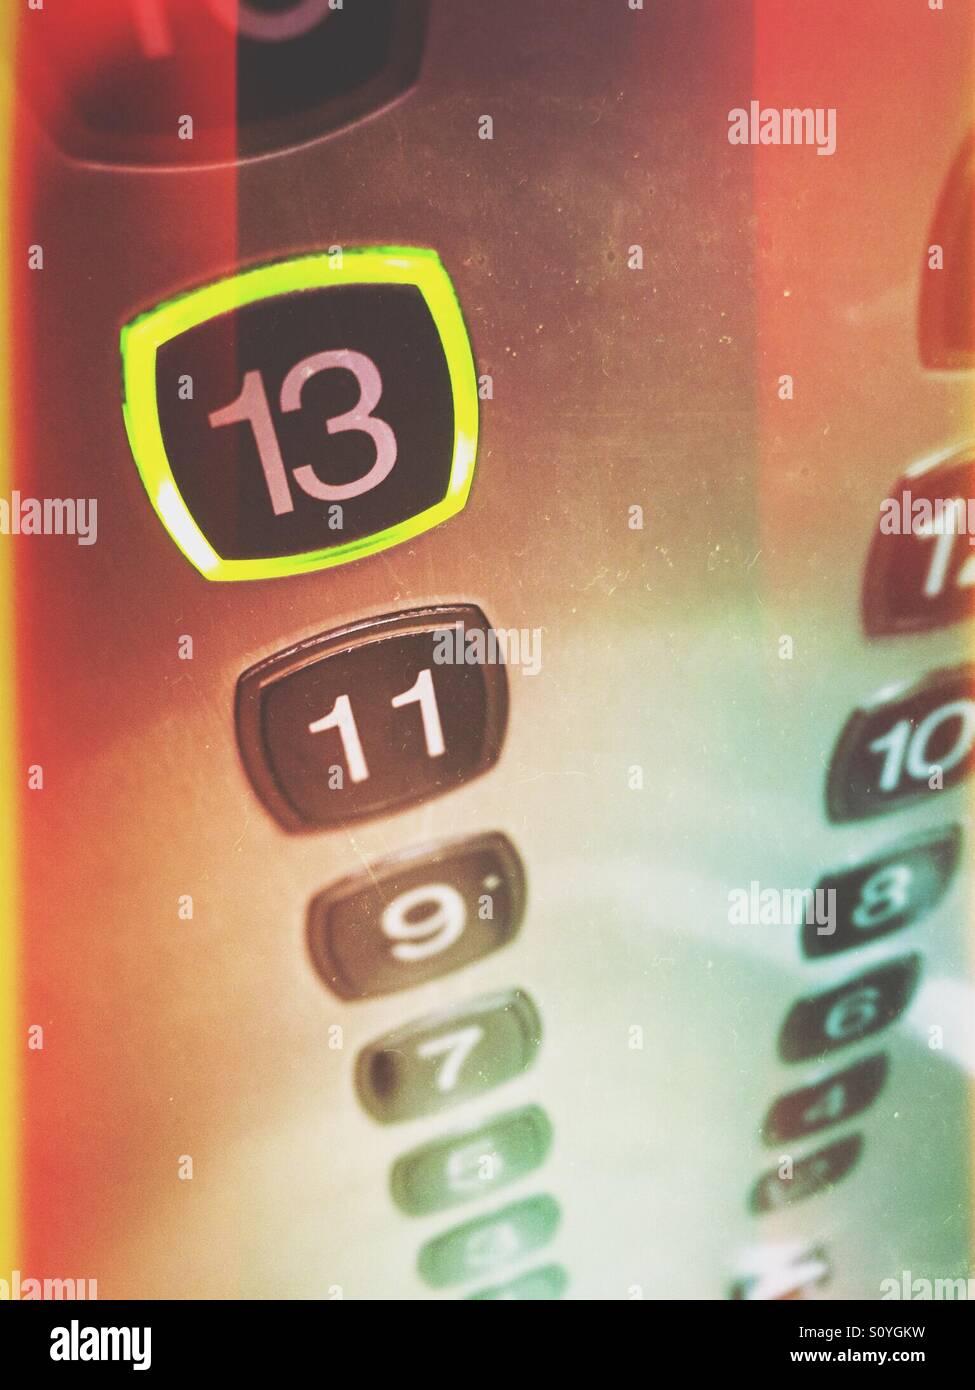 13th floor button pushed in elevator Stock Photo